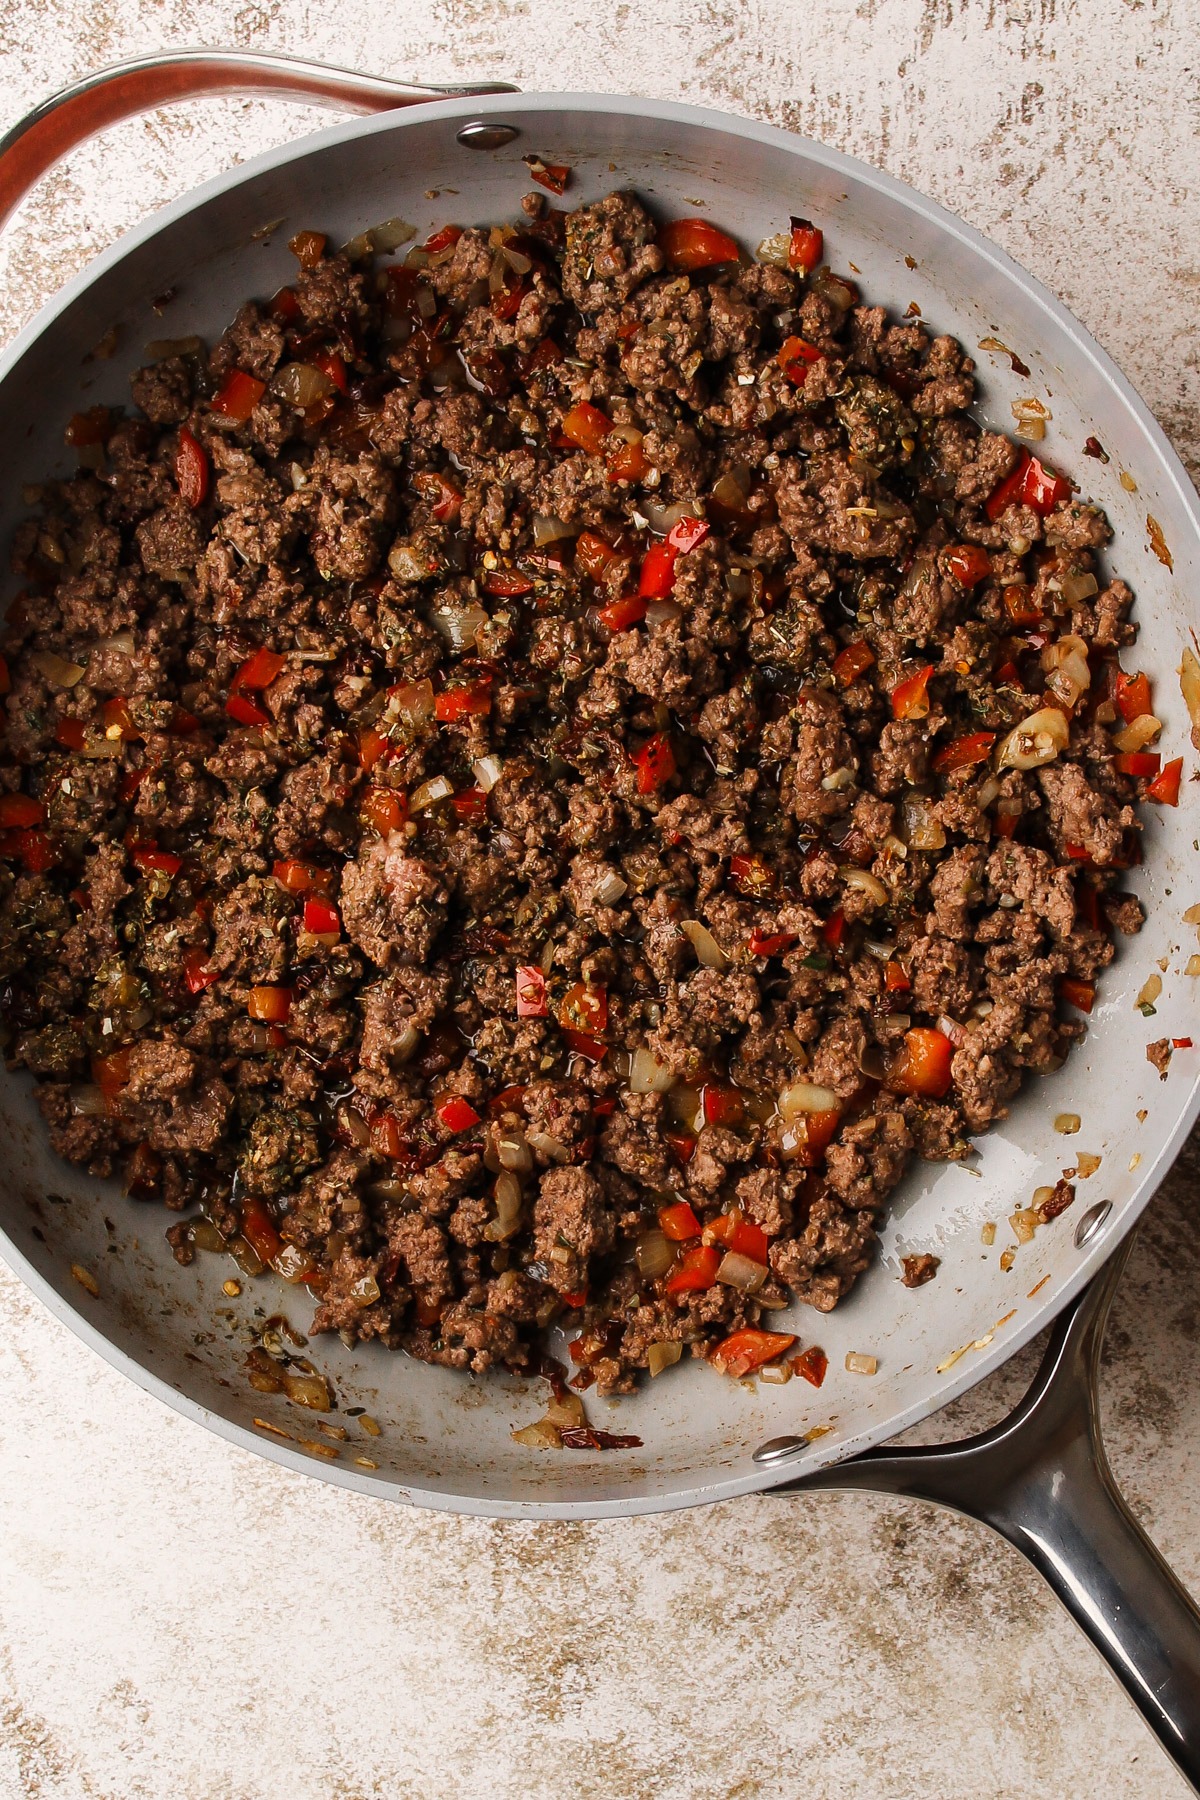 Ground beef cooking in a skillet with Italian sofrito.